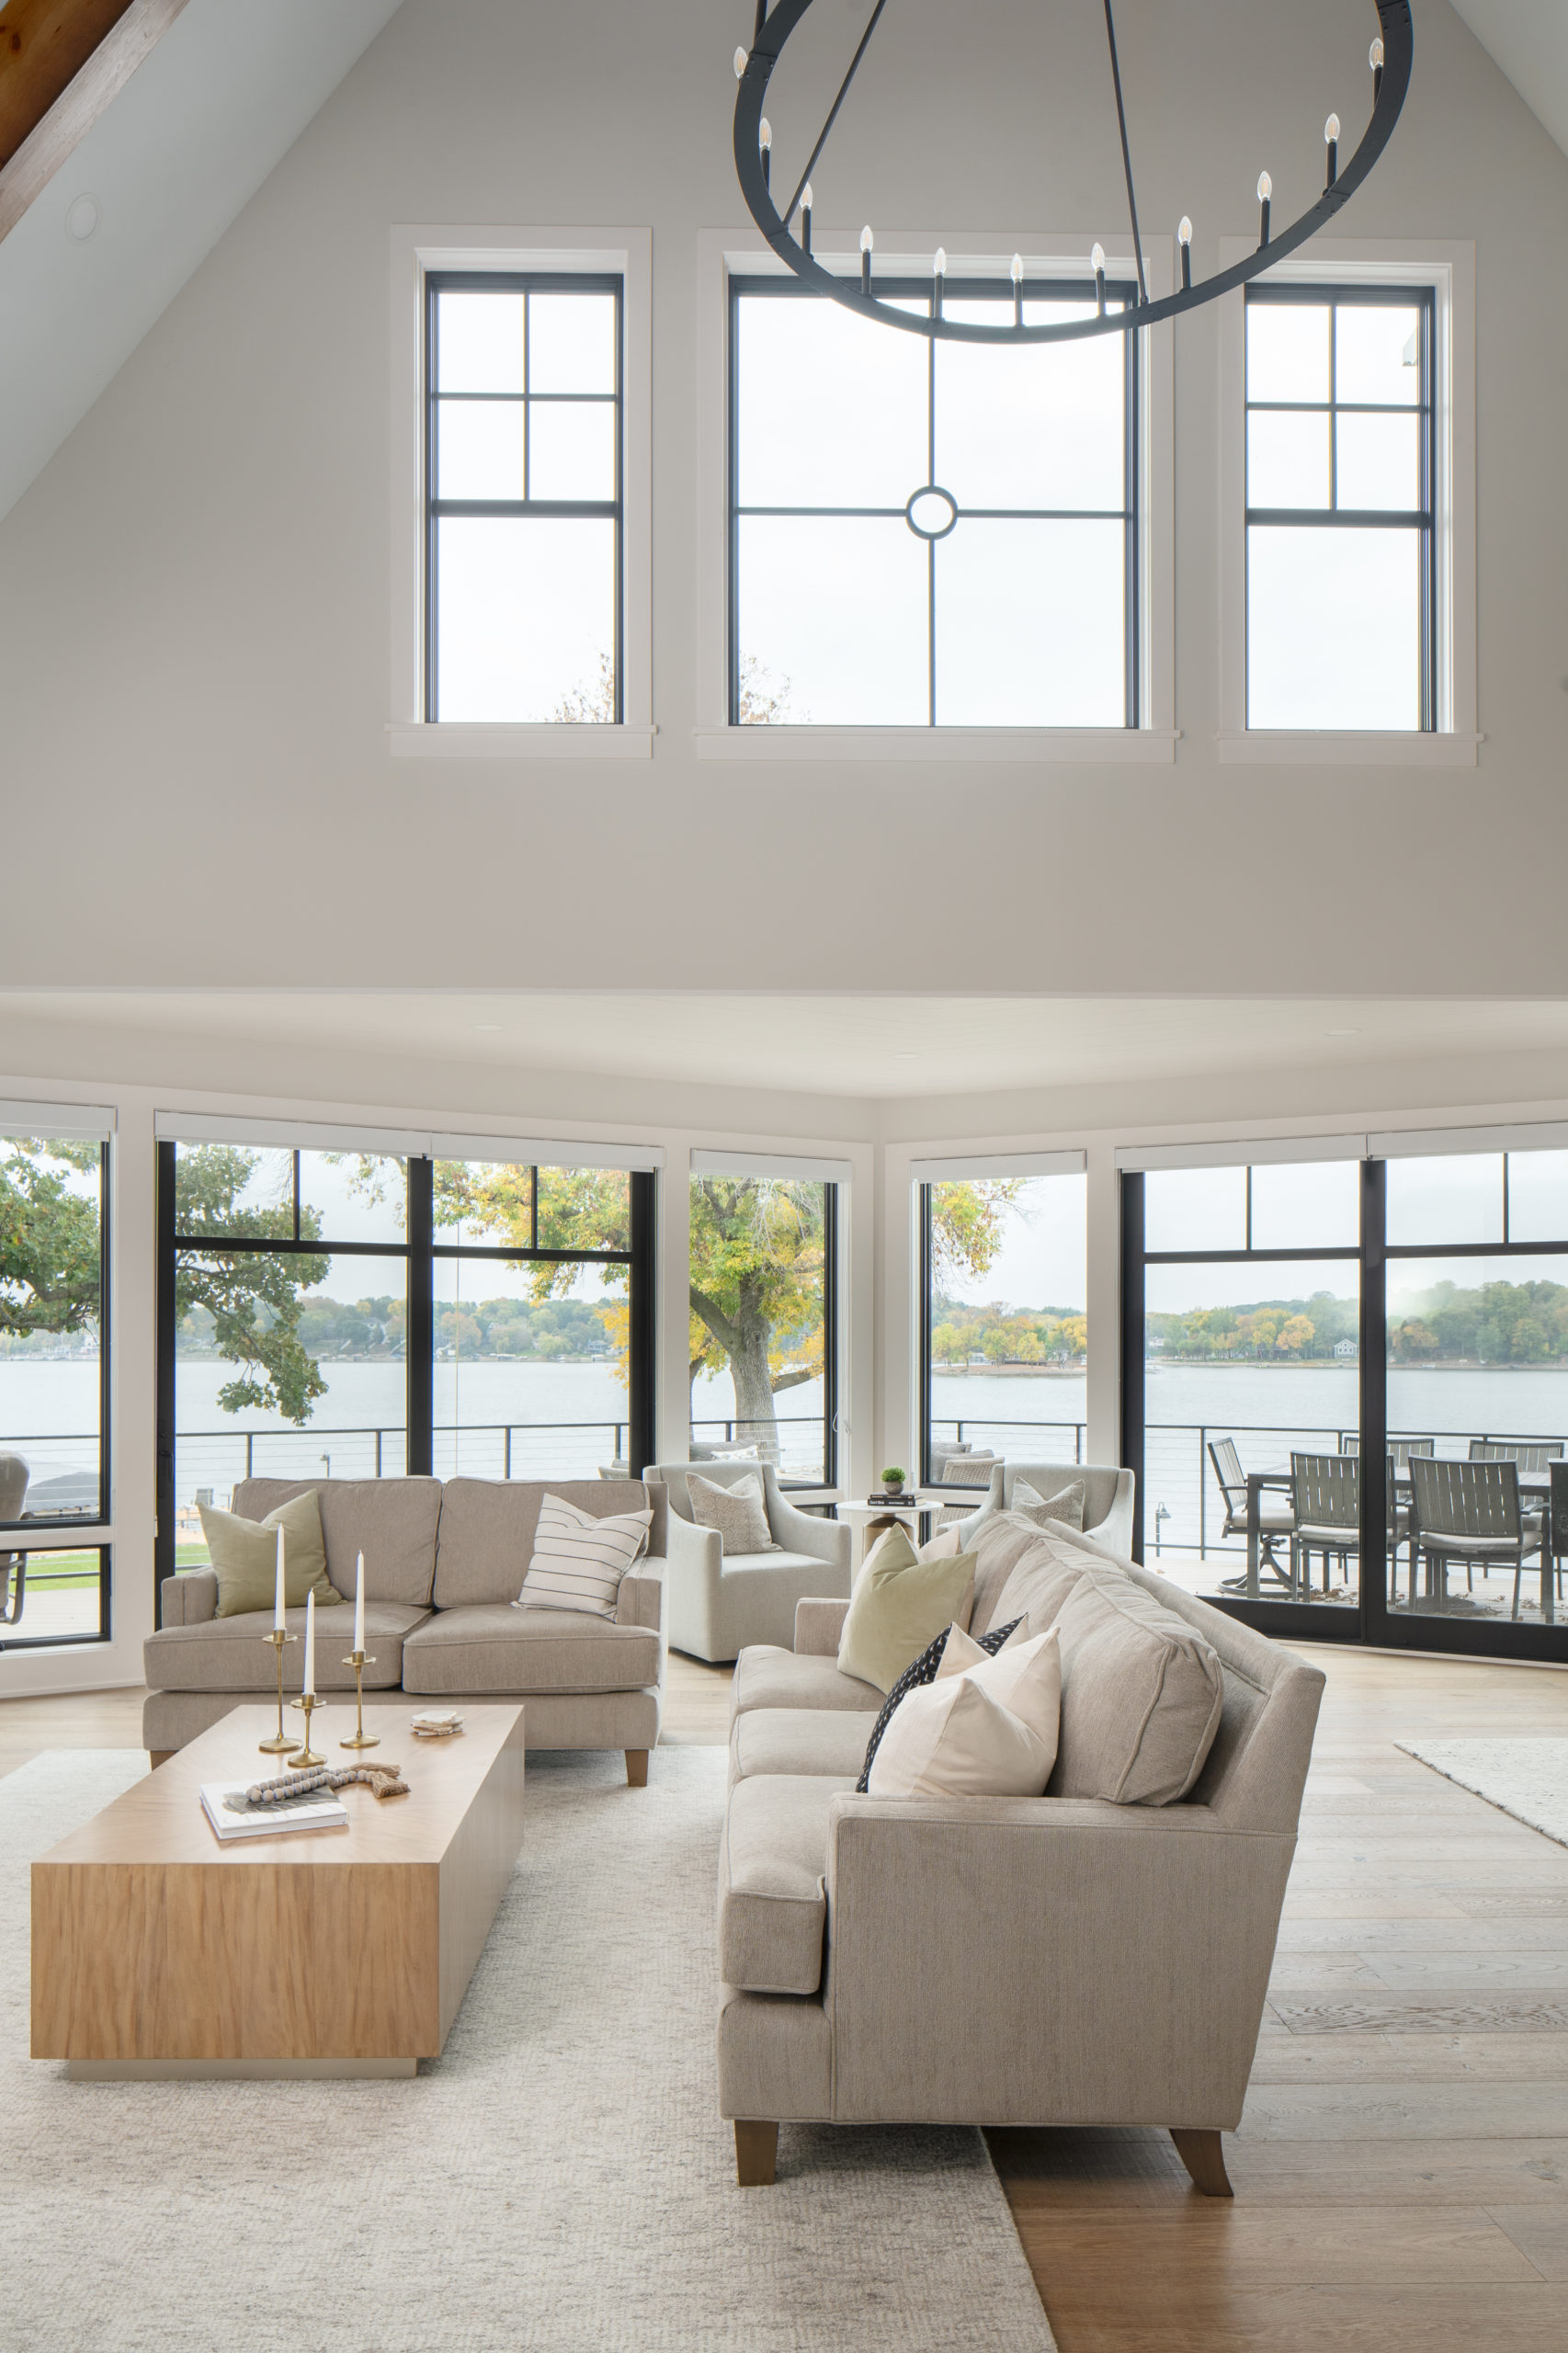 The Lake Escape custom home remodel transformed a large living room with large windows overlooking the lake.